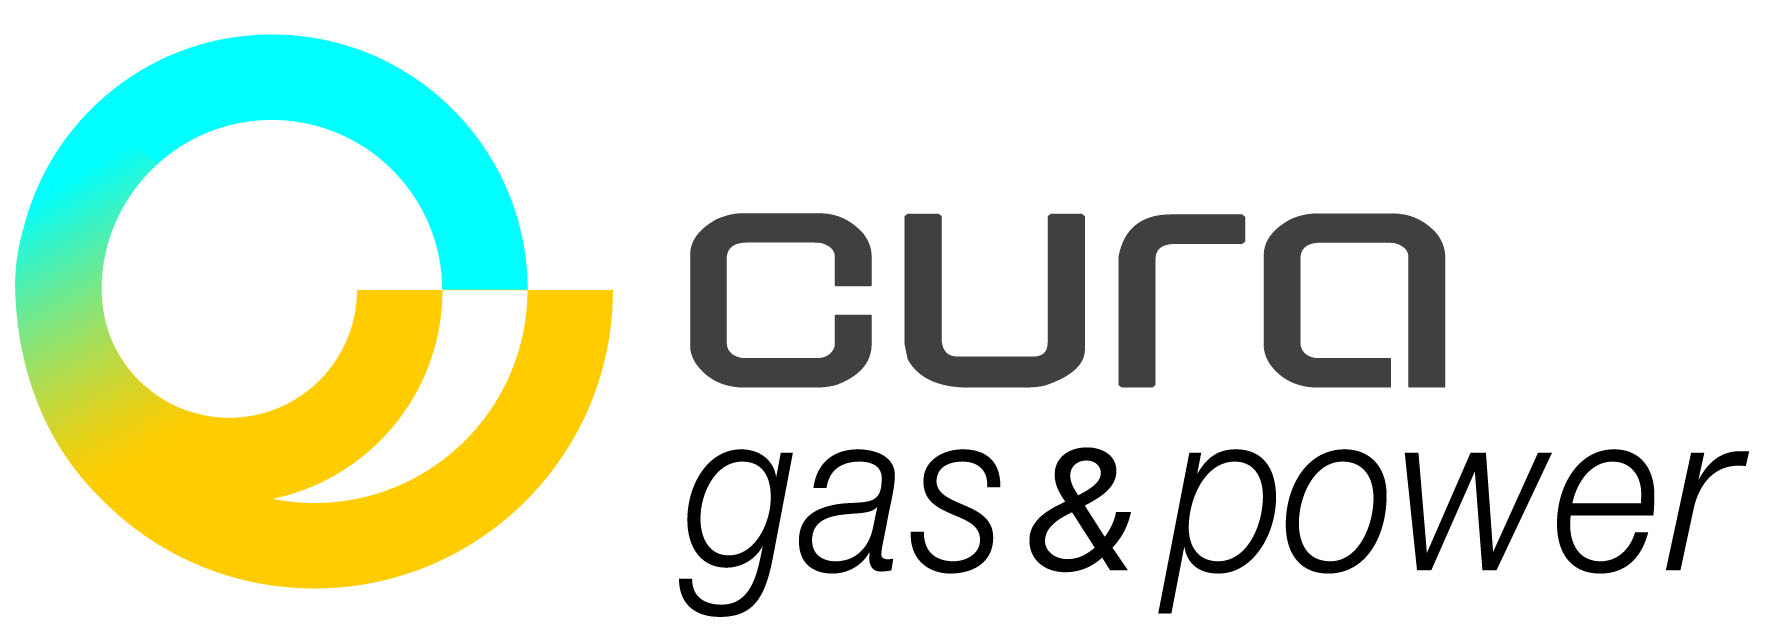 Cura Gas and Power S.p.A.